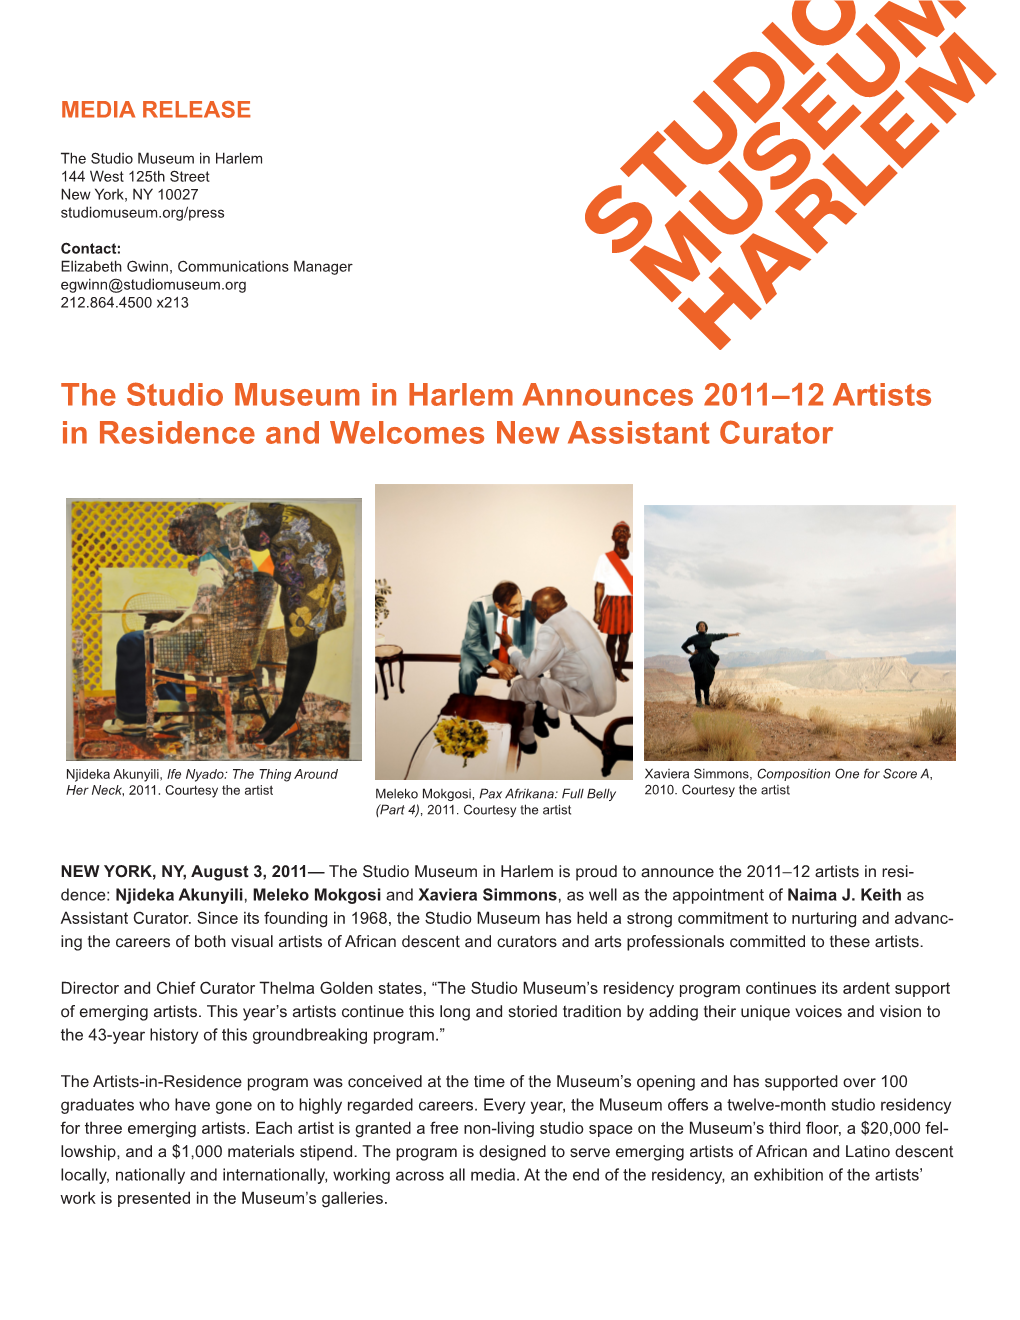 The Studio Museum in Harlem Announces 2011–12 Artists in Residence and Welcomes New Assistant Curator